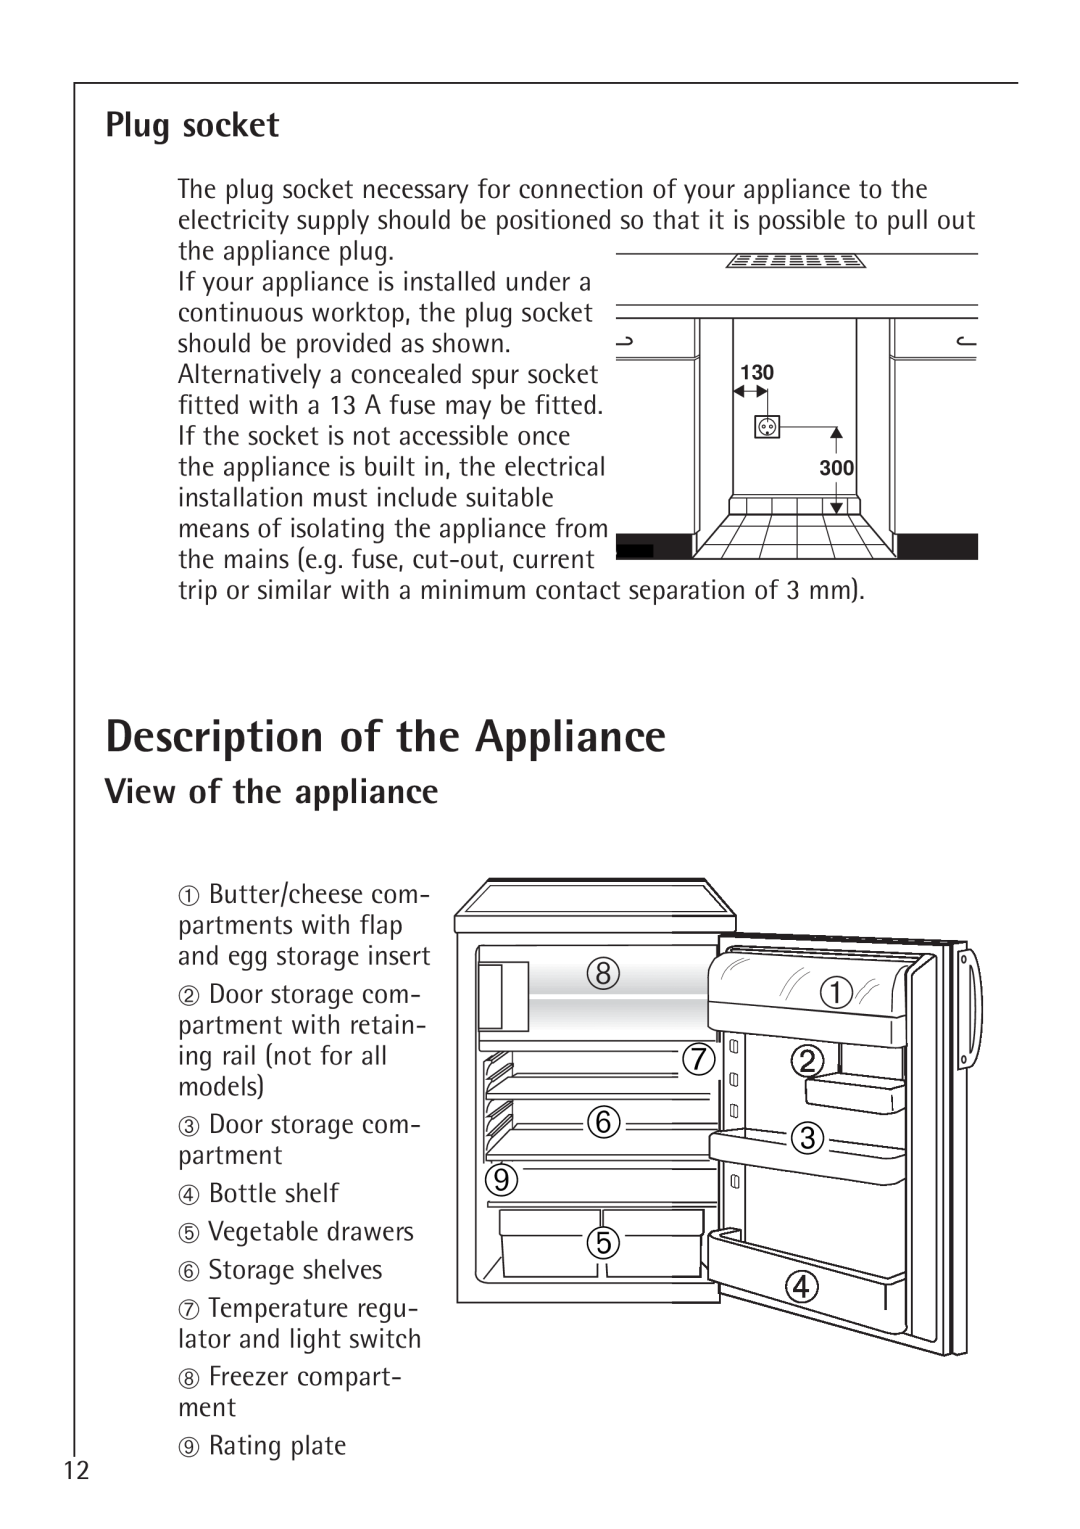 AEG 1450-7 TK manual Description of the Appliance, Plug socket, View of the appliance 